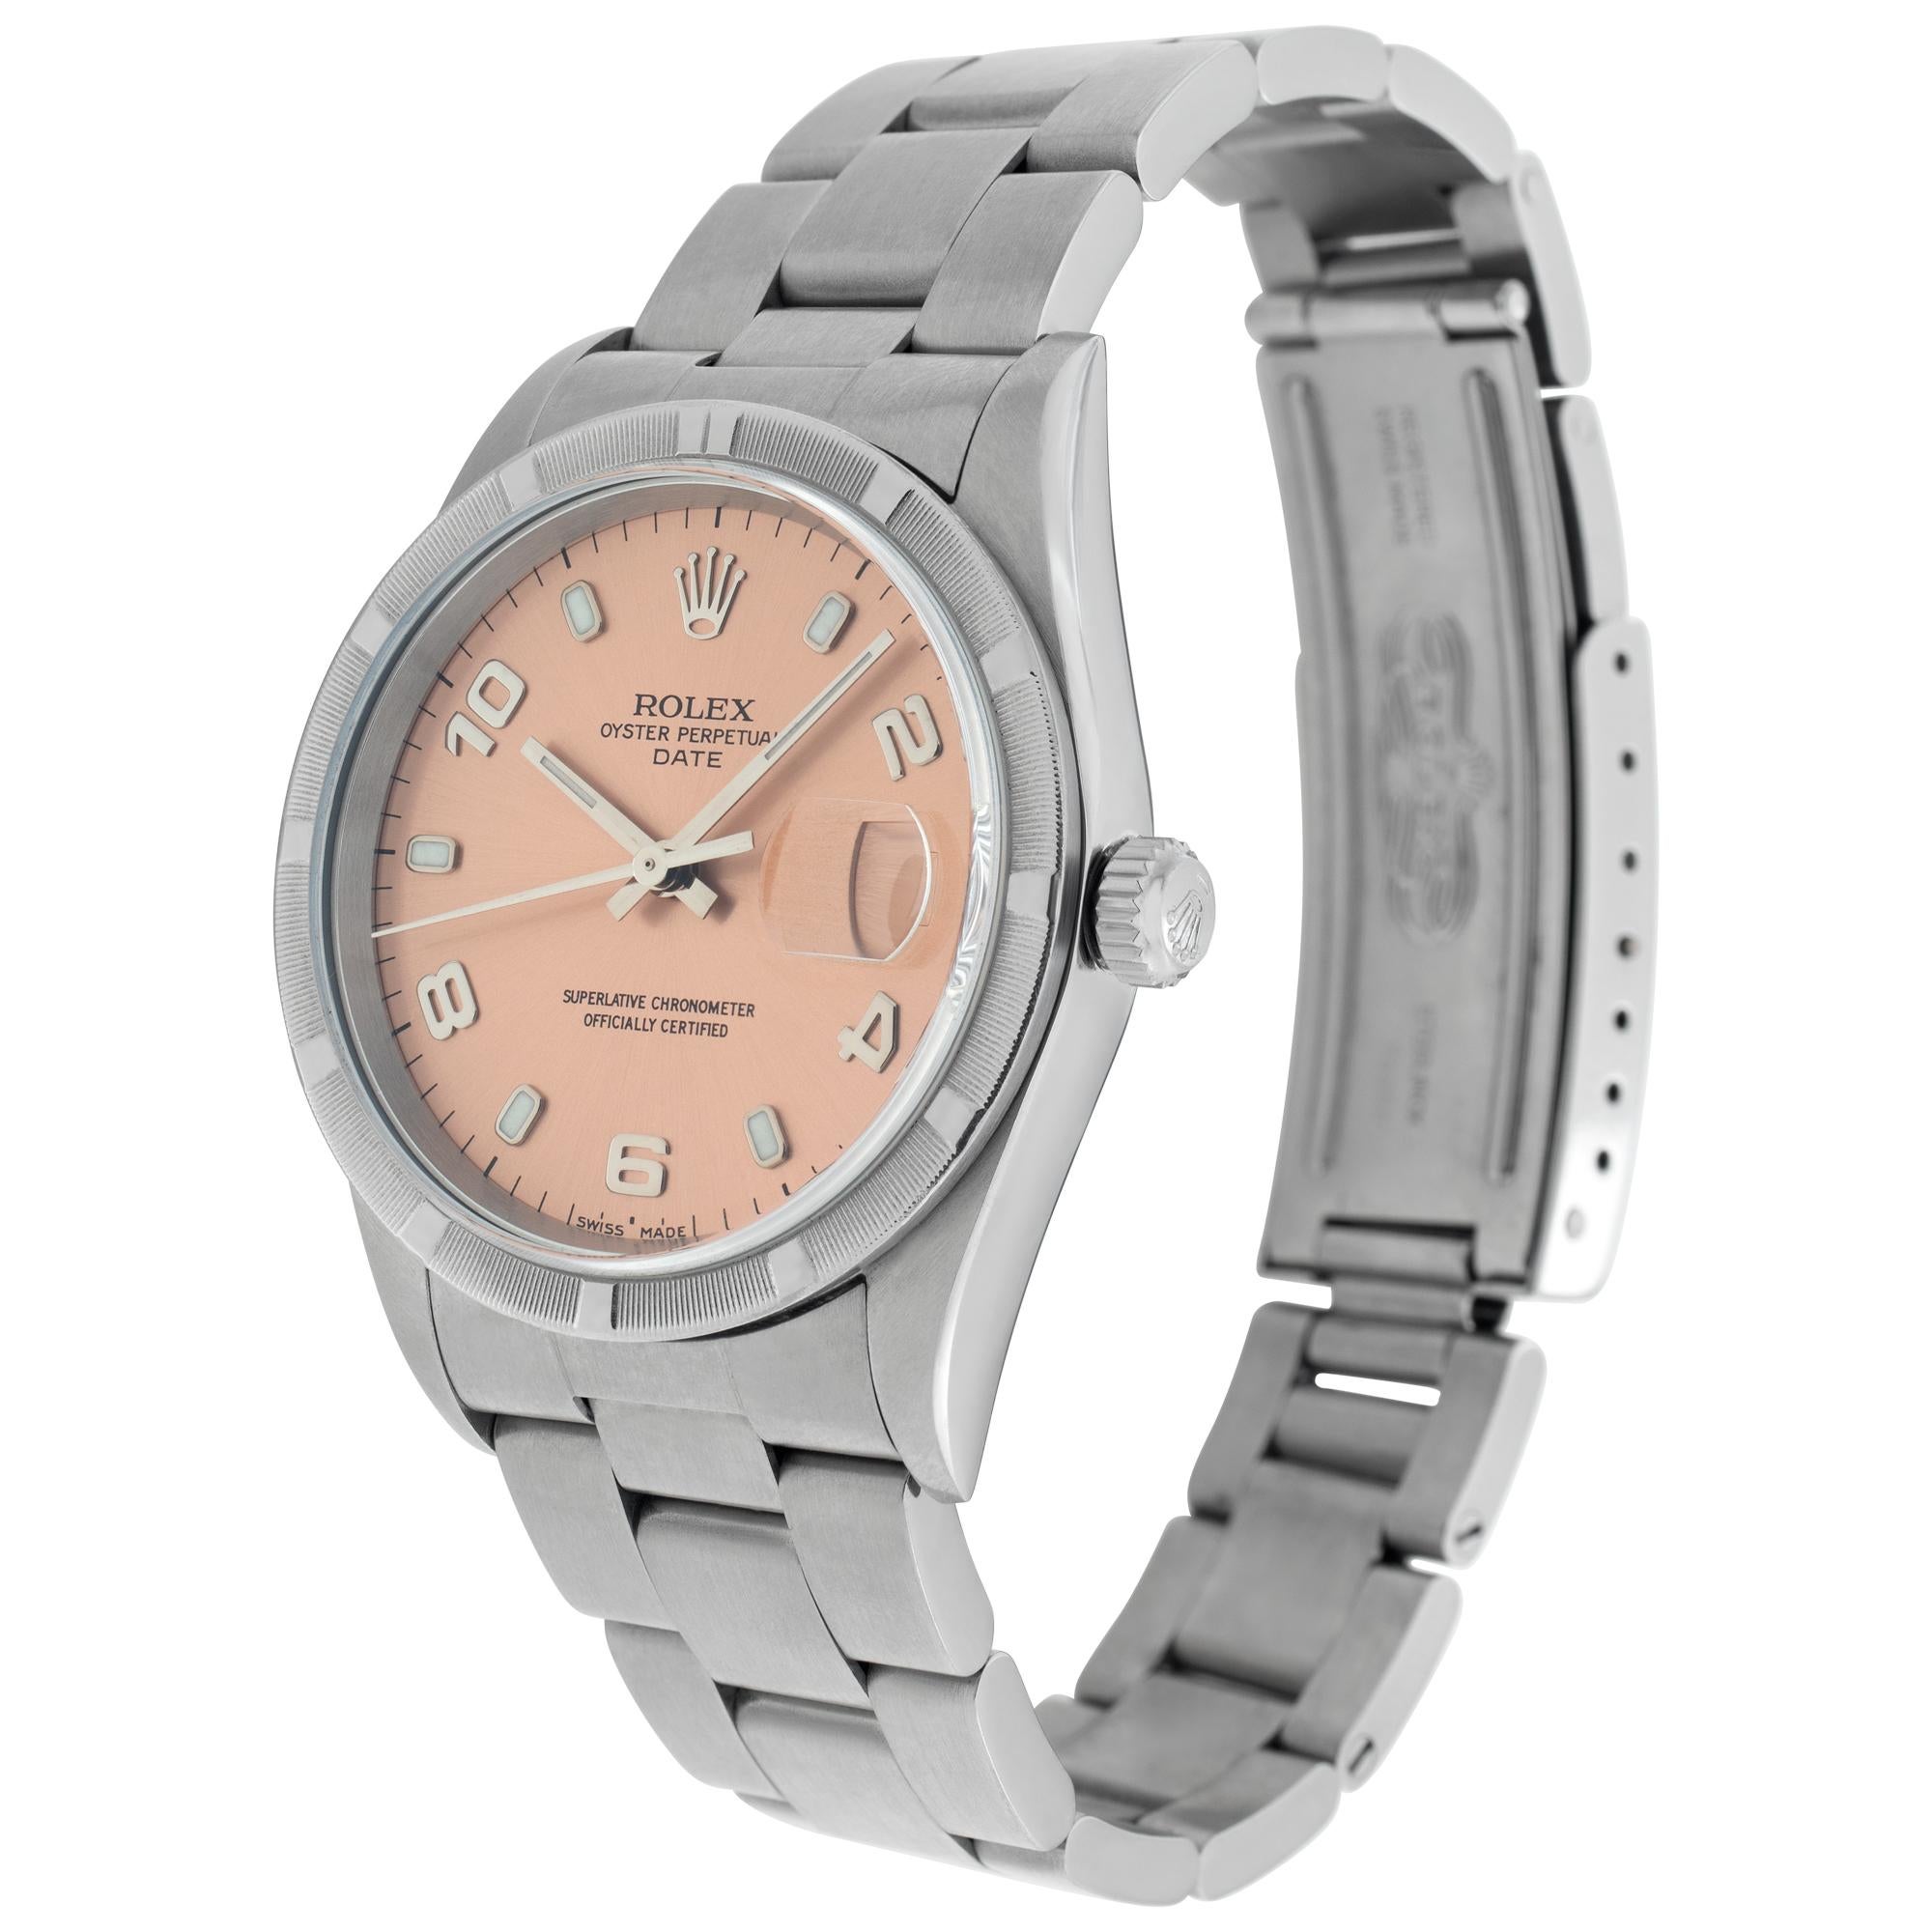 Rolex Date in stainless steel with Engine-Turned bezel & pink/salmon Arabic applied hour marker dial. Auto w/ sweep seconds and date. 34 mm case size. **Bank wire only at this price** Ref 15210. Circa 2000. Fine Pre-owned Rolex Watch. Certified